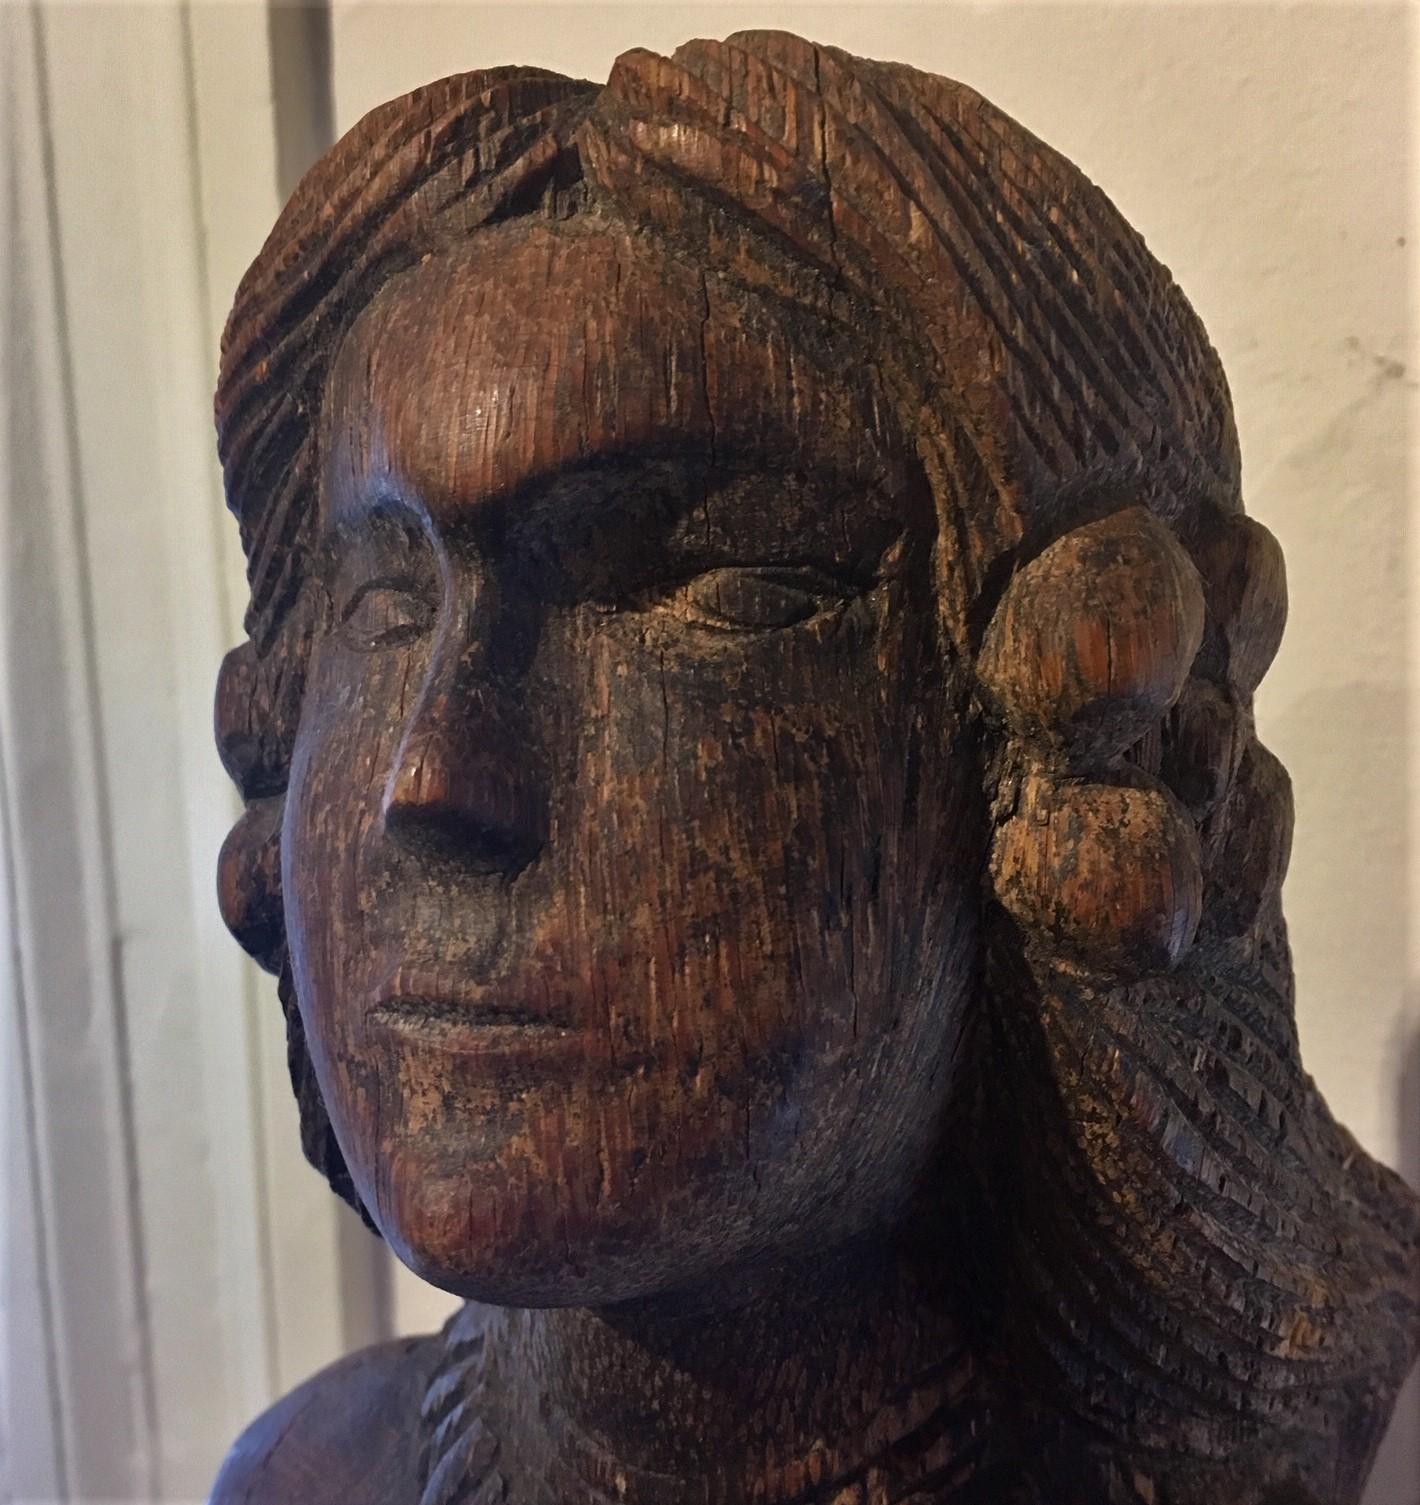 Early vintage or antique South Seas carved teak Mermaid, circa 1920s or perhaps earlier, a hand carved upright figure holding a carved shell, with deeply carved flowers in grooved hair flowing down back, shell necklace, and scale pattern throughout